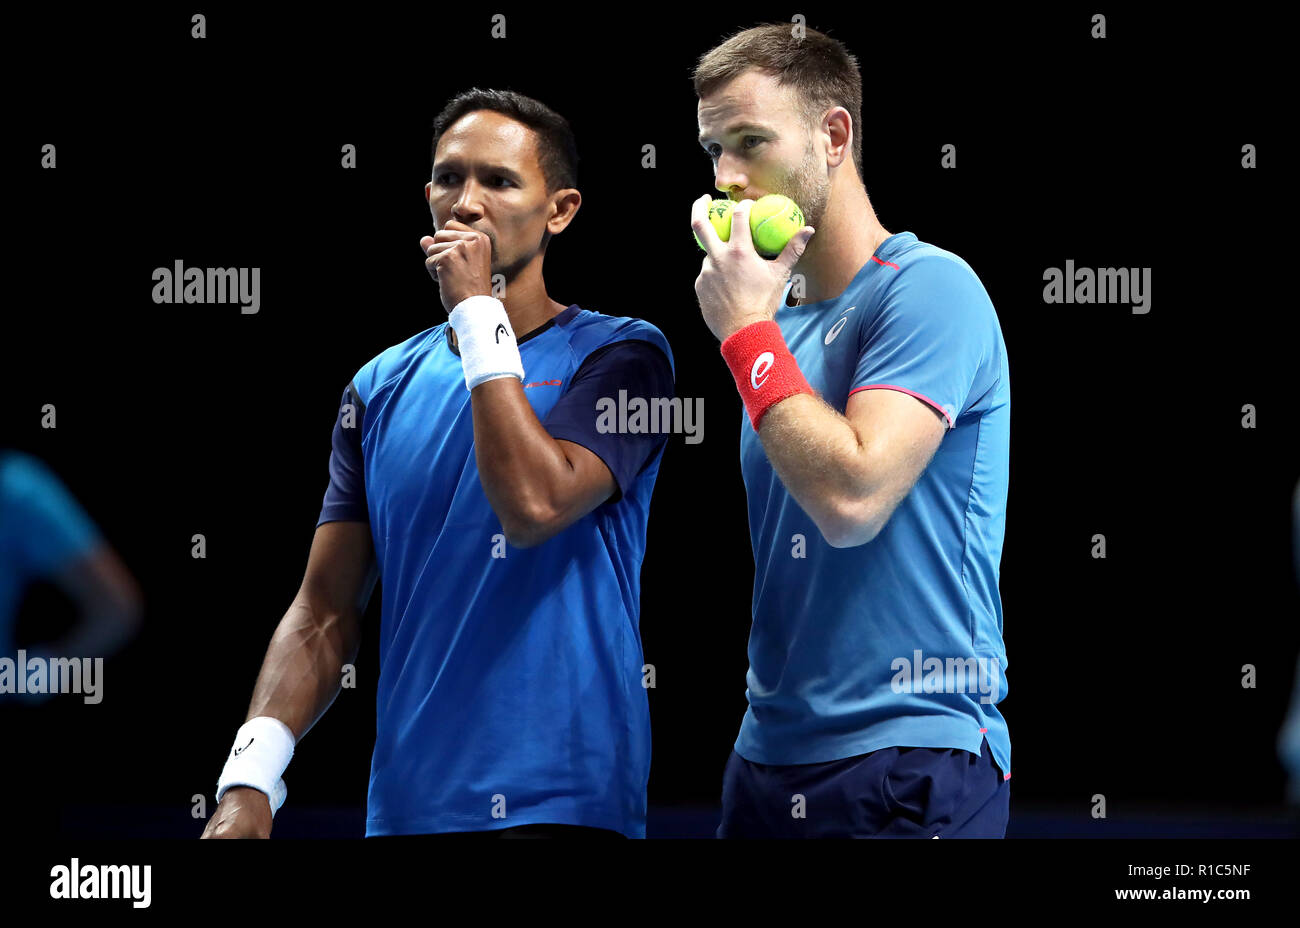 Raven Klassen (left) and Michael Venus during the Men's Doubles group stage match during day one of the Nitto ATP Finals at The O2 Arena, London. Stock Photo